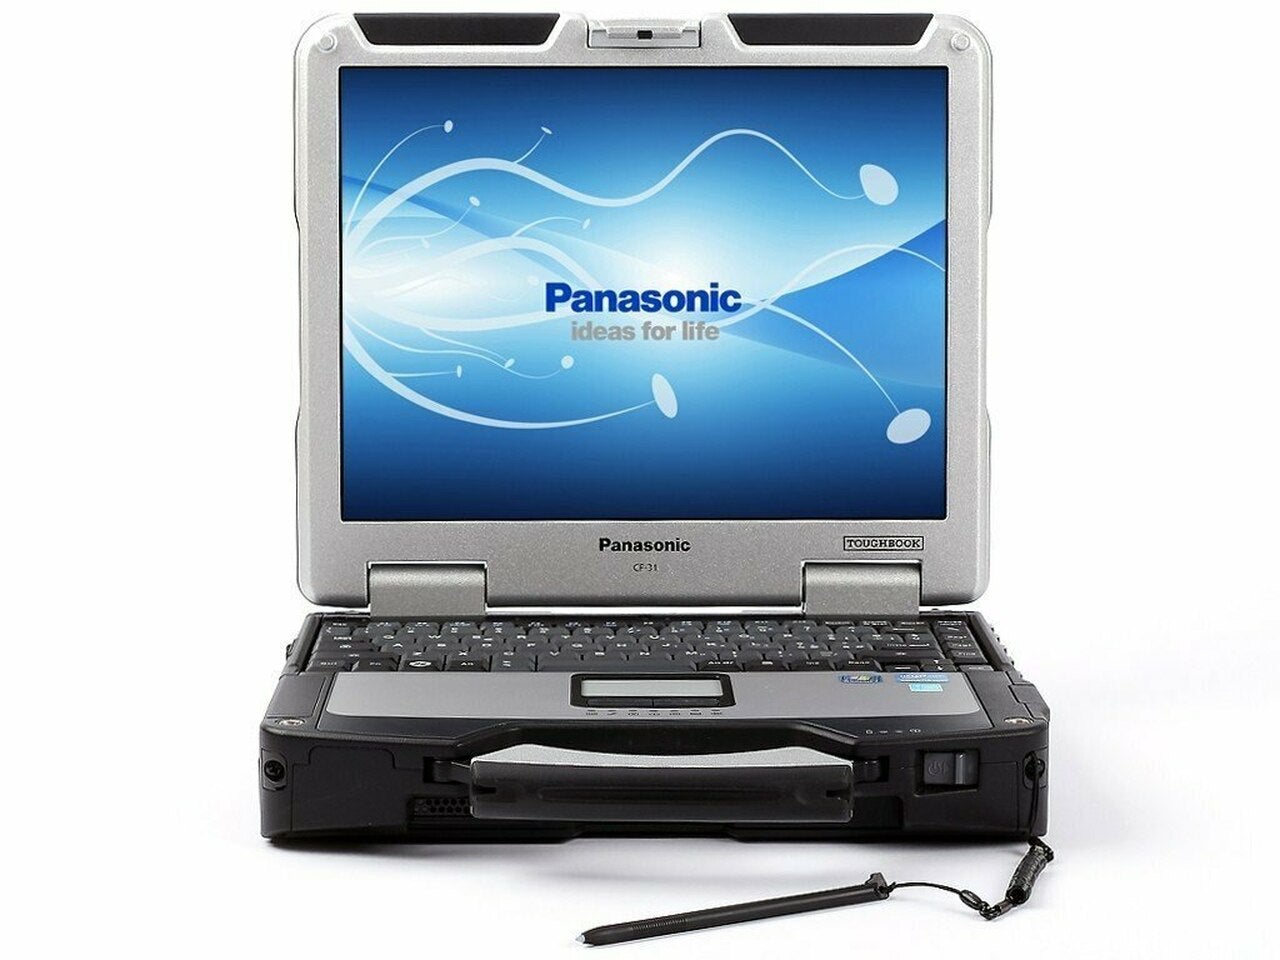 Refurbished Panasonic CF 31 MK5 - Jaltest Deluxe Diagnostic Computer Kit for Commercial Vehicle, Construction & Agriculture Equipment